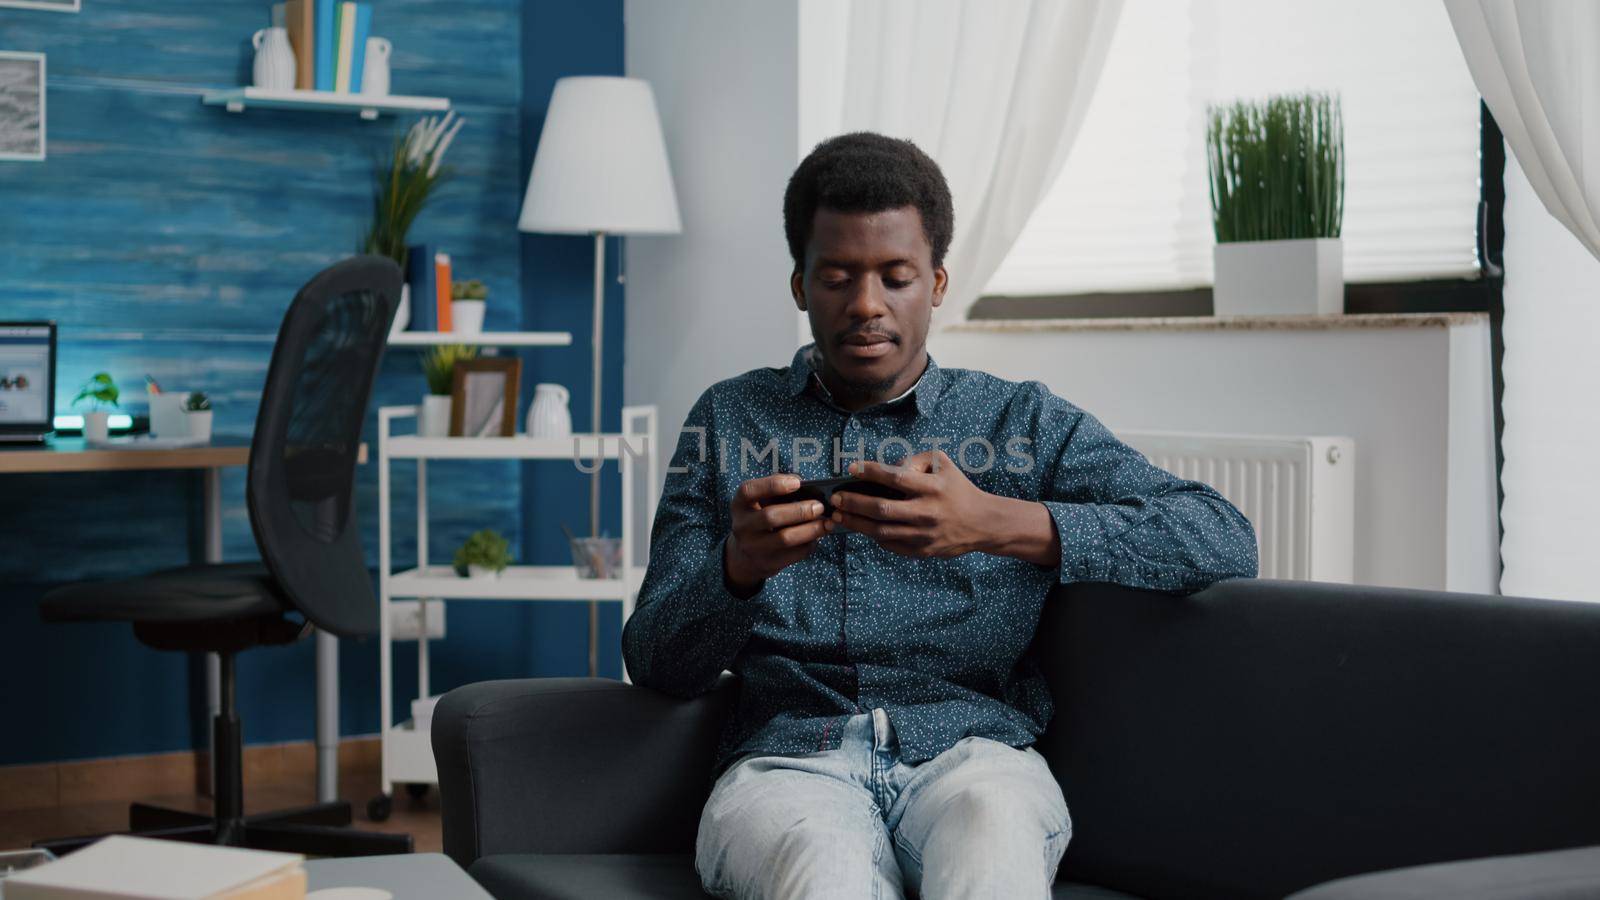 African american man playing video games on his phone, lying in bed, using internet wirelles internet connection. Gamer on smartphone technology working